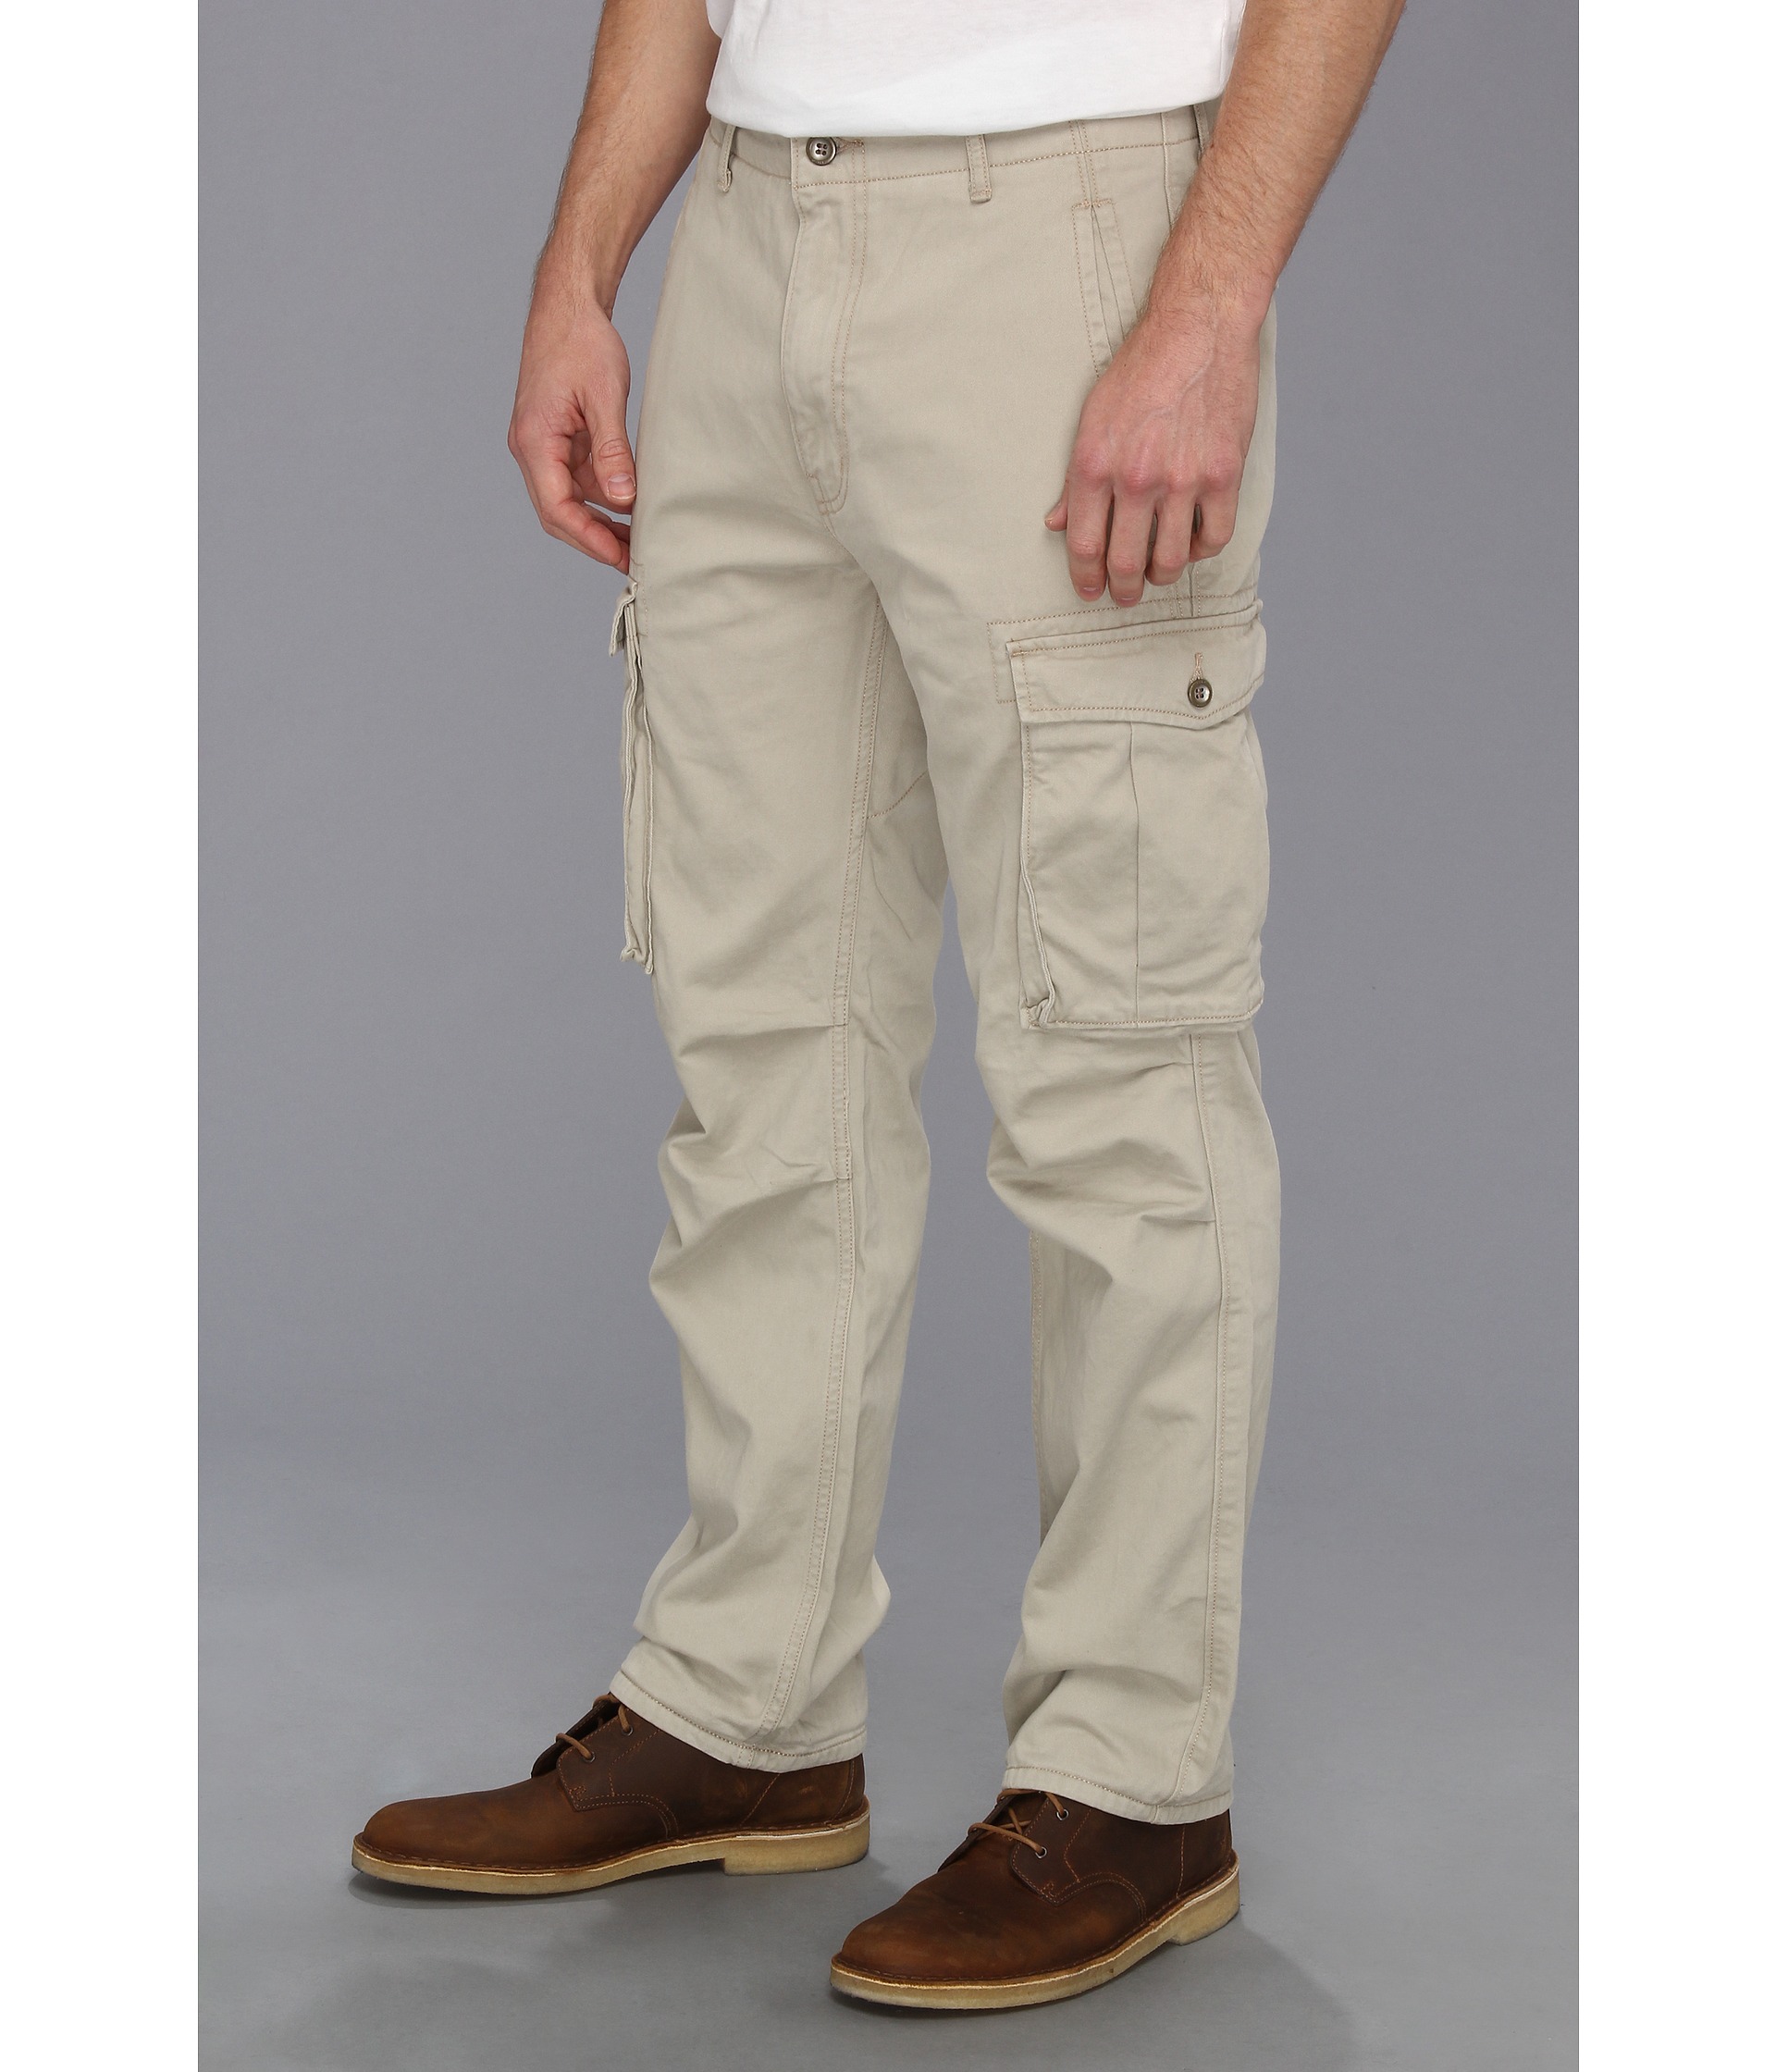 Levis Mens Contrast Cargo Pant | Shipped Free at Zappos